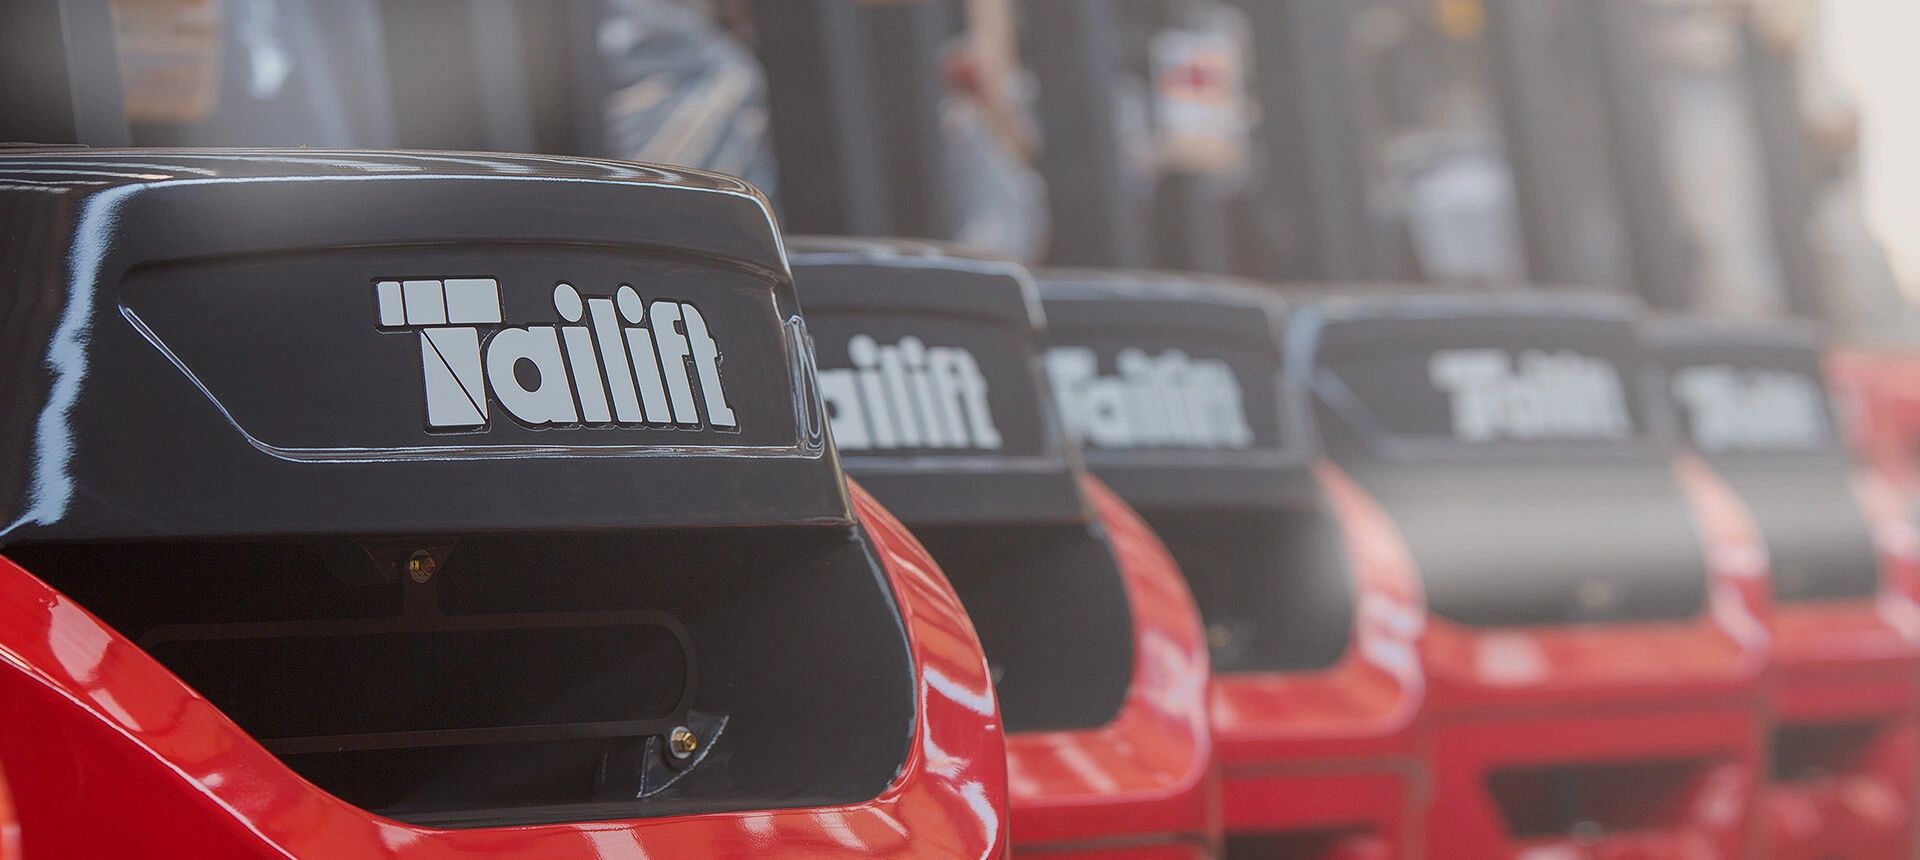 Tailift forklifts at E.T. Service